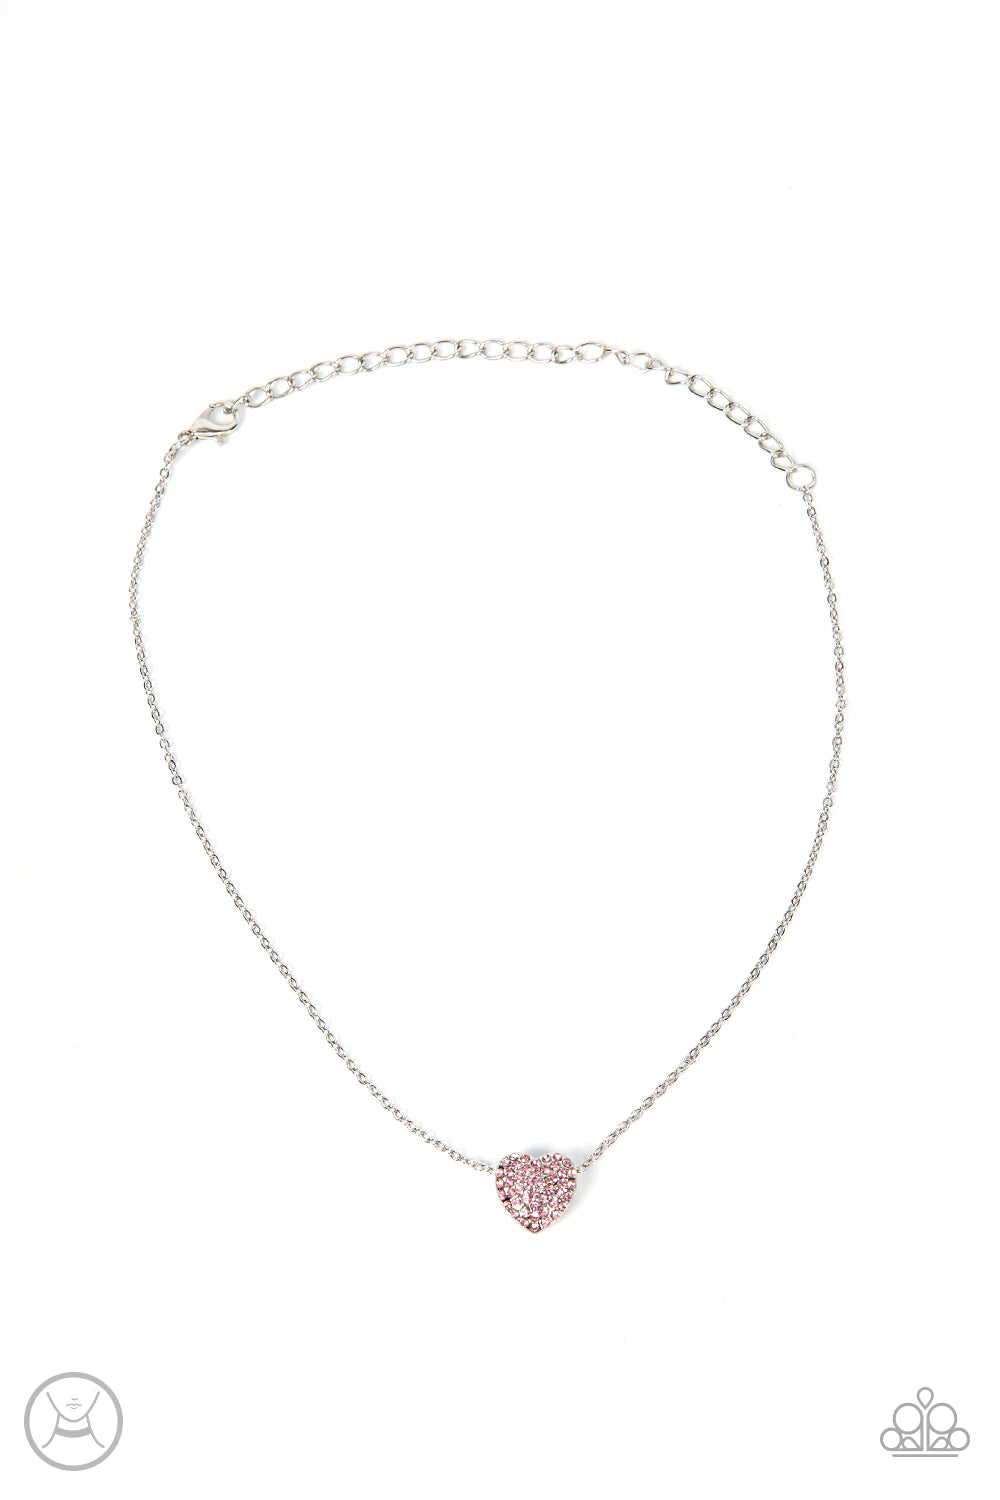 Paparazzi Accessories - Twitterpated Twinkle #N775 Box 8  - Pink Choker Necklace